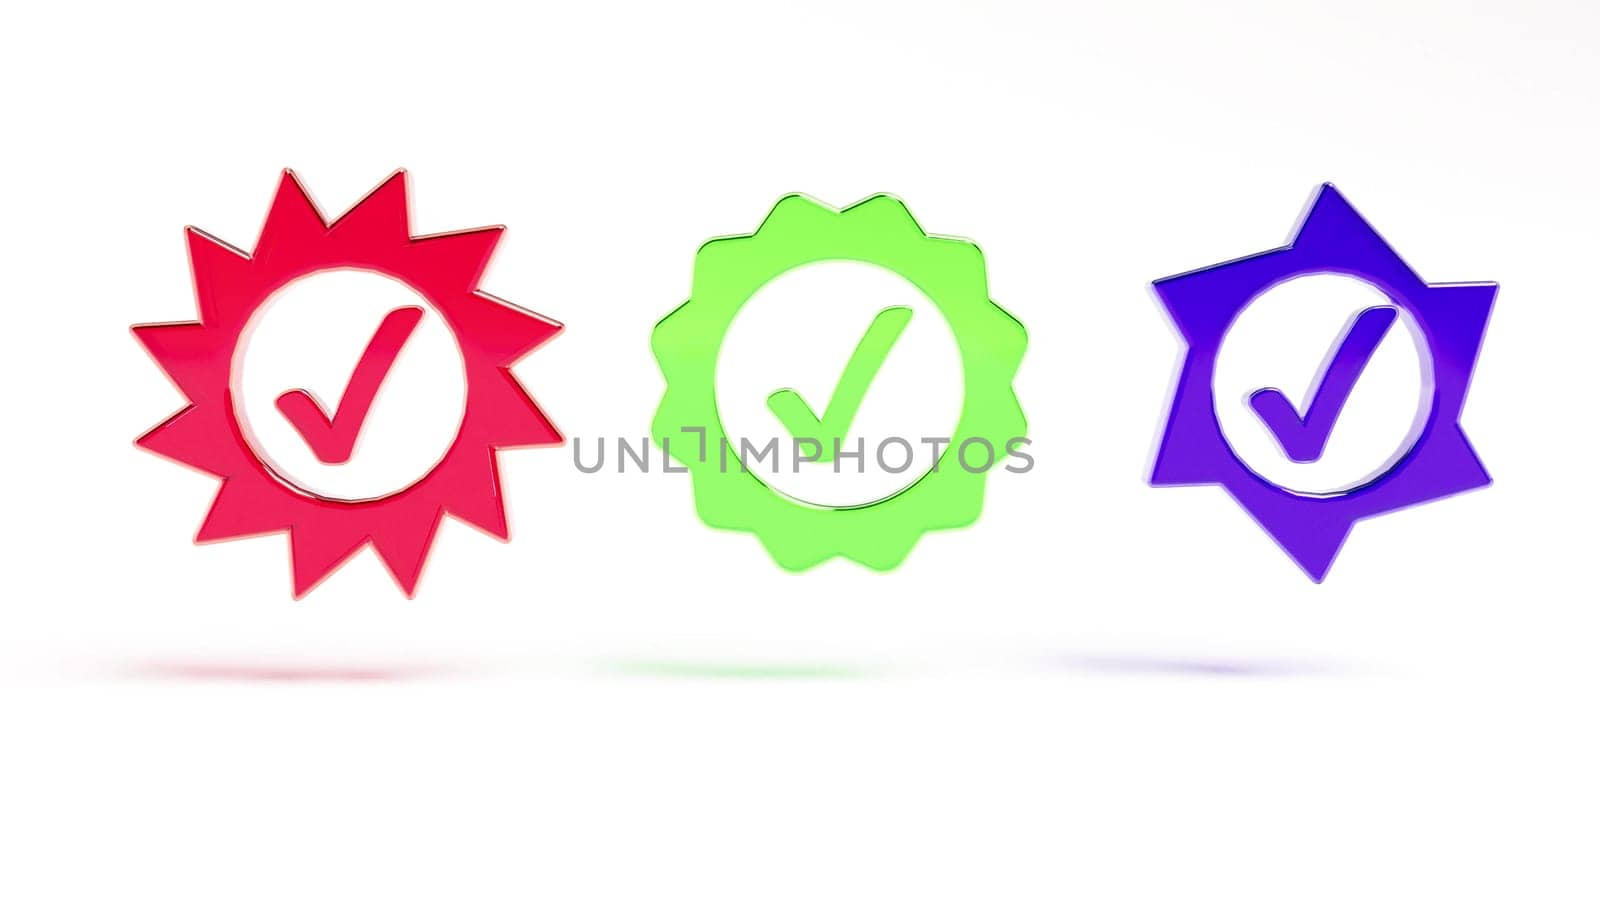 Color glass Signs symbols check mark rotate on white bg 3d render by Zozulinskyi